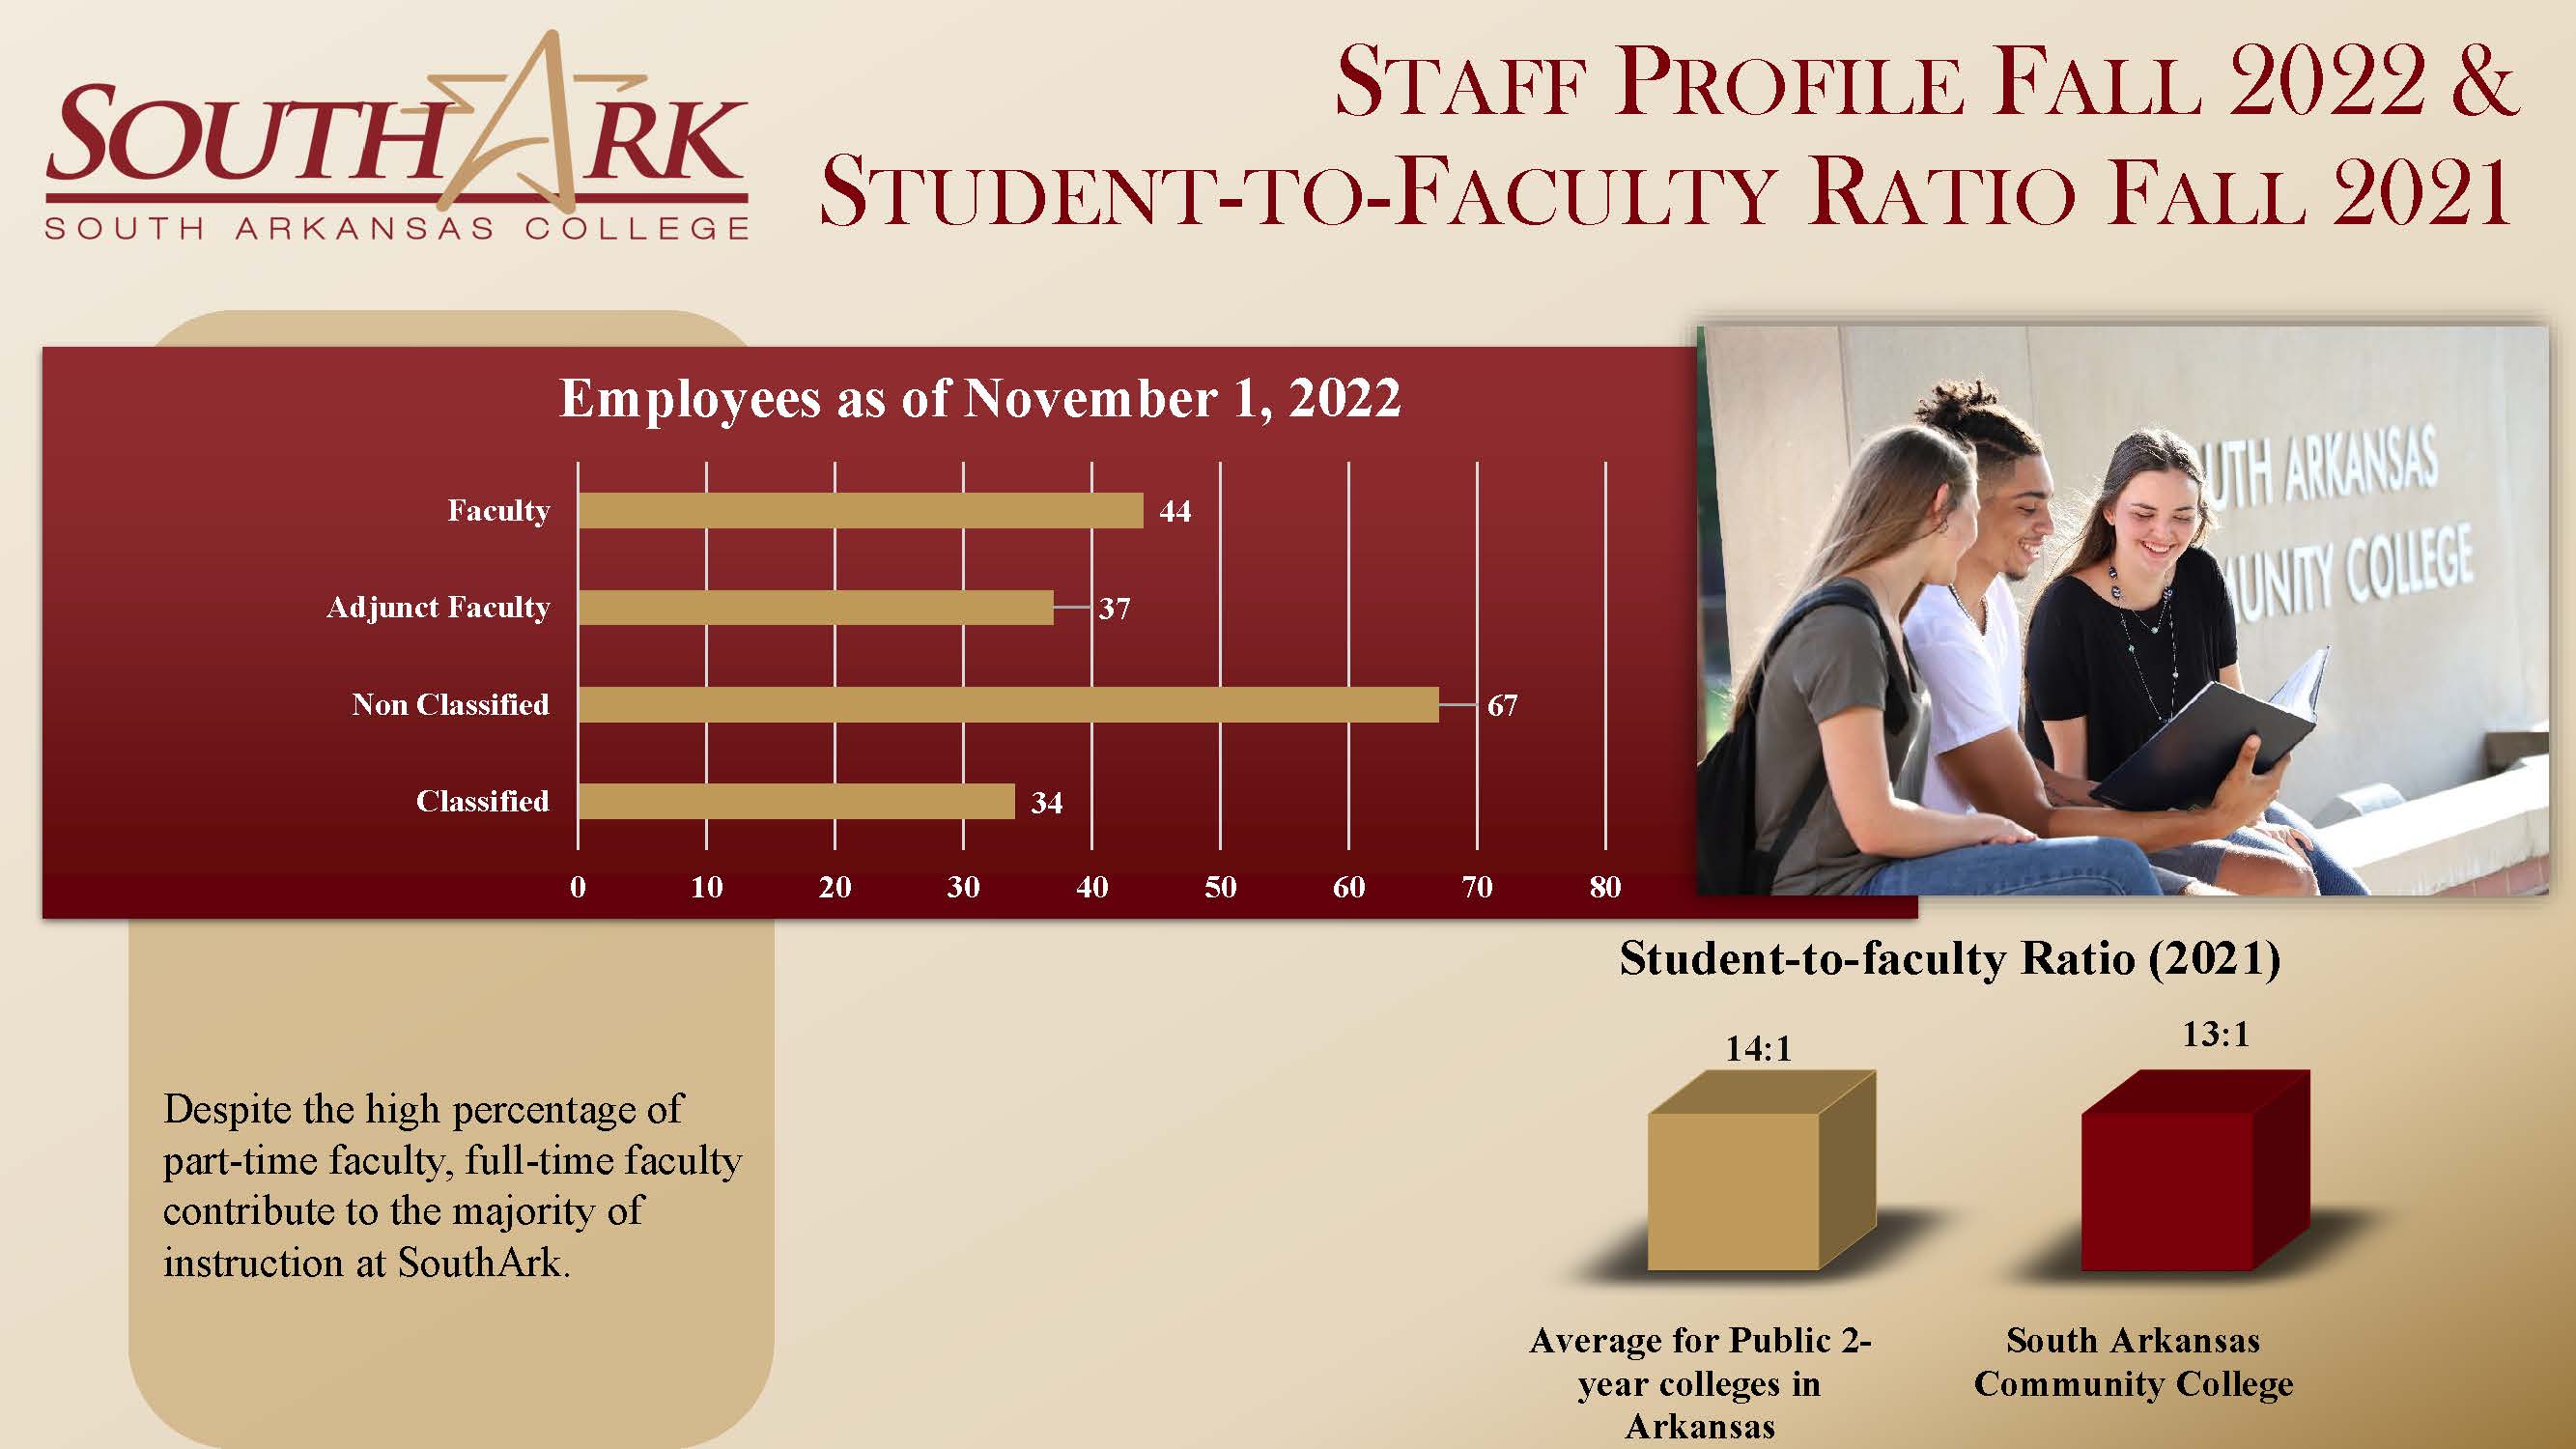 Staff Profile and Student-to-Faculty Ratio